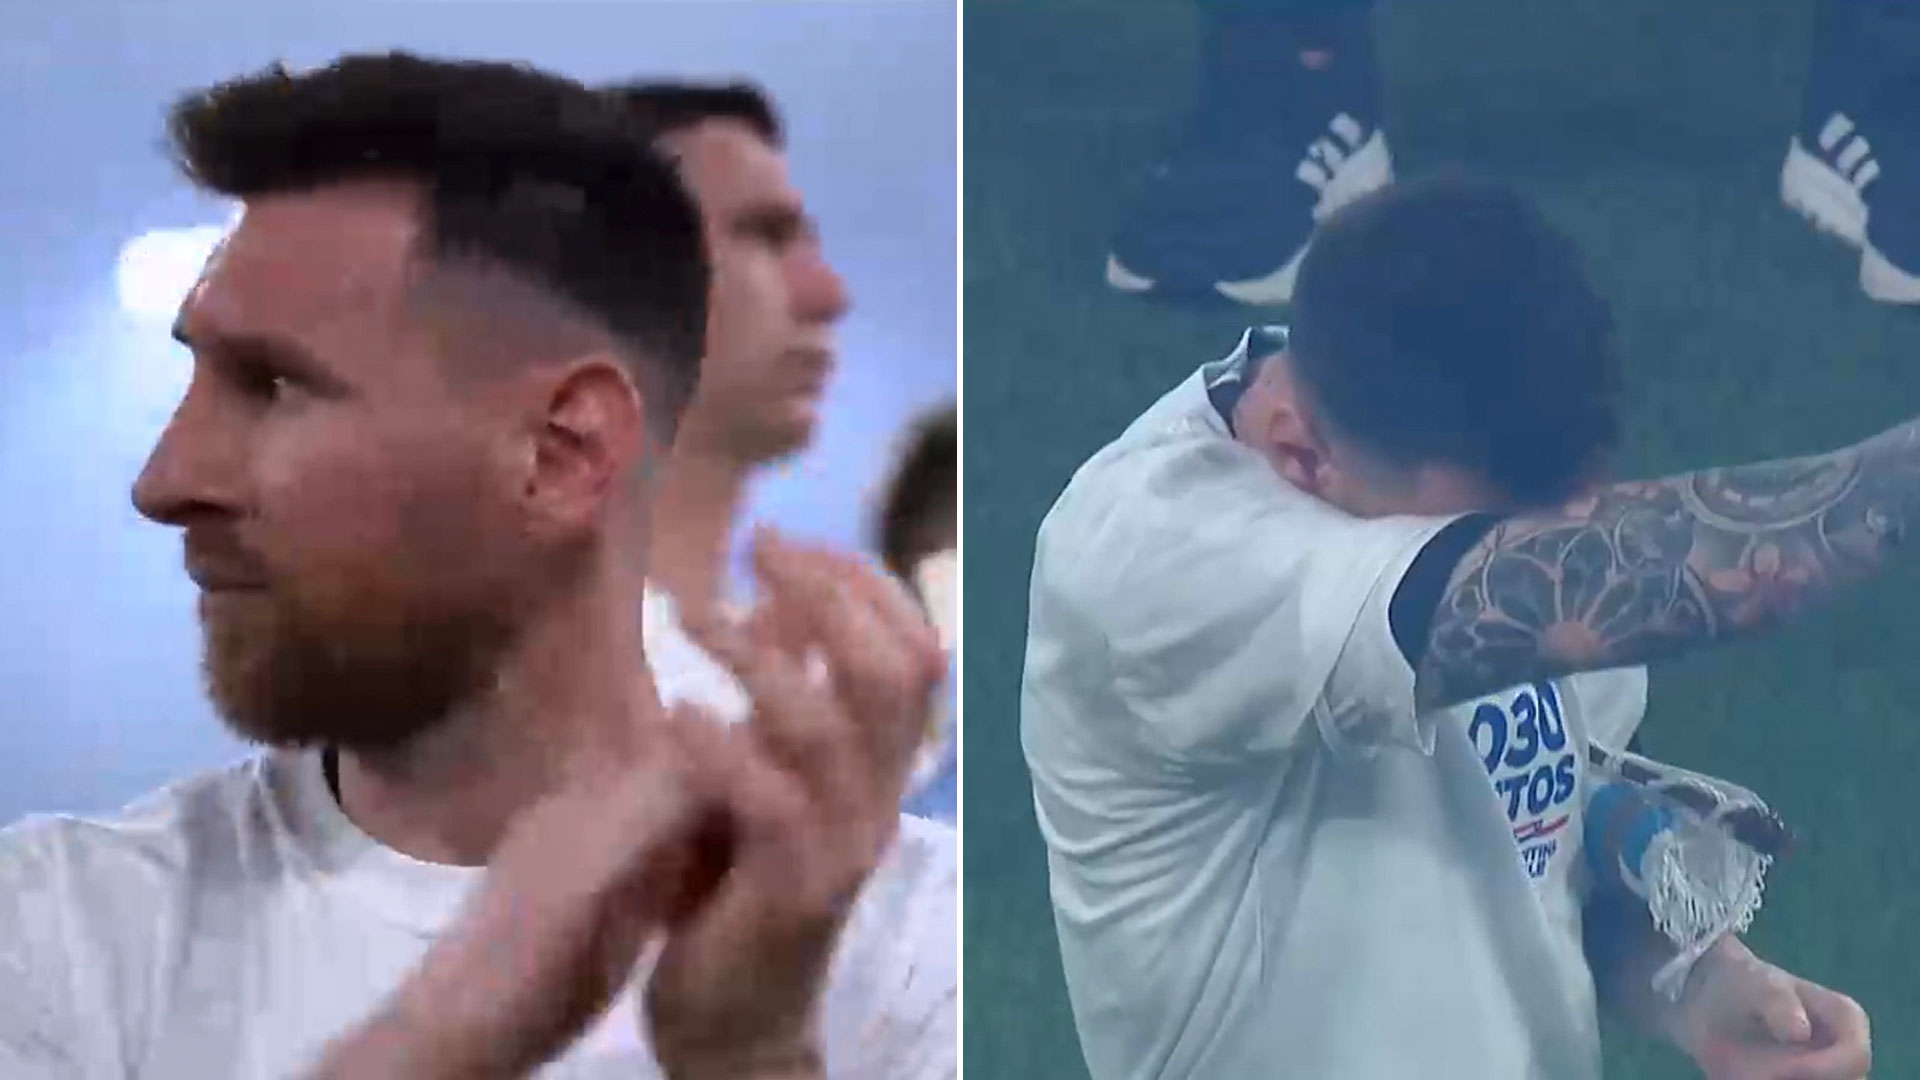 Leo Messi's emotion at the end of the anthem (TV clip)